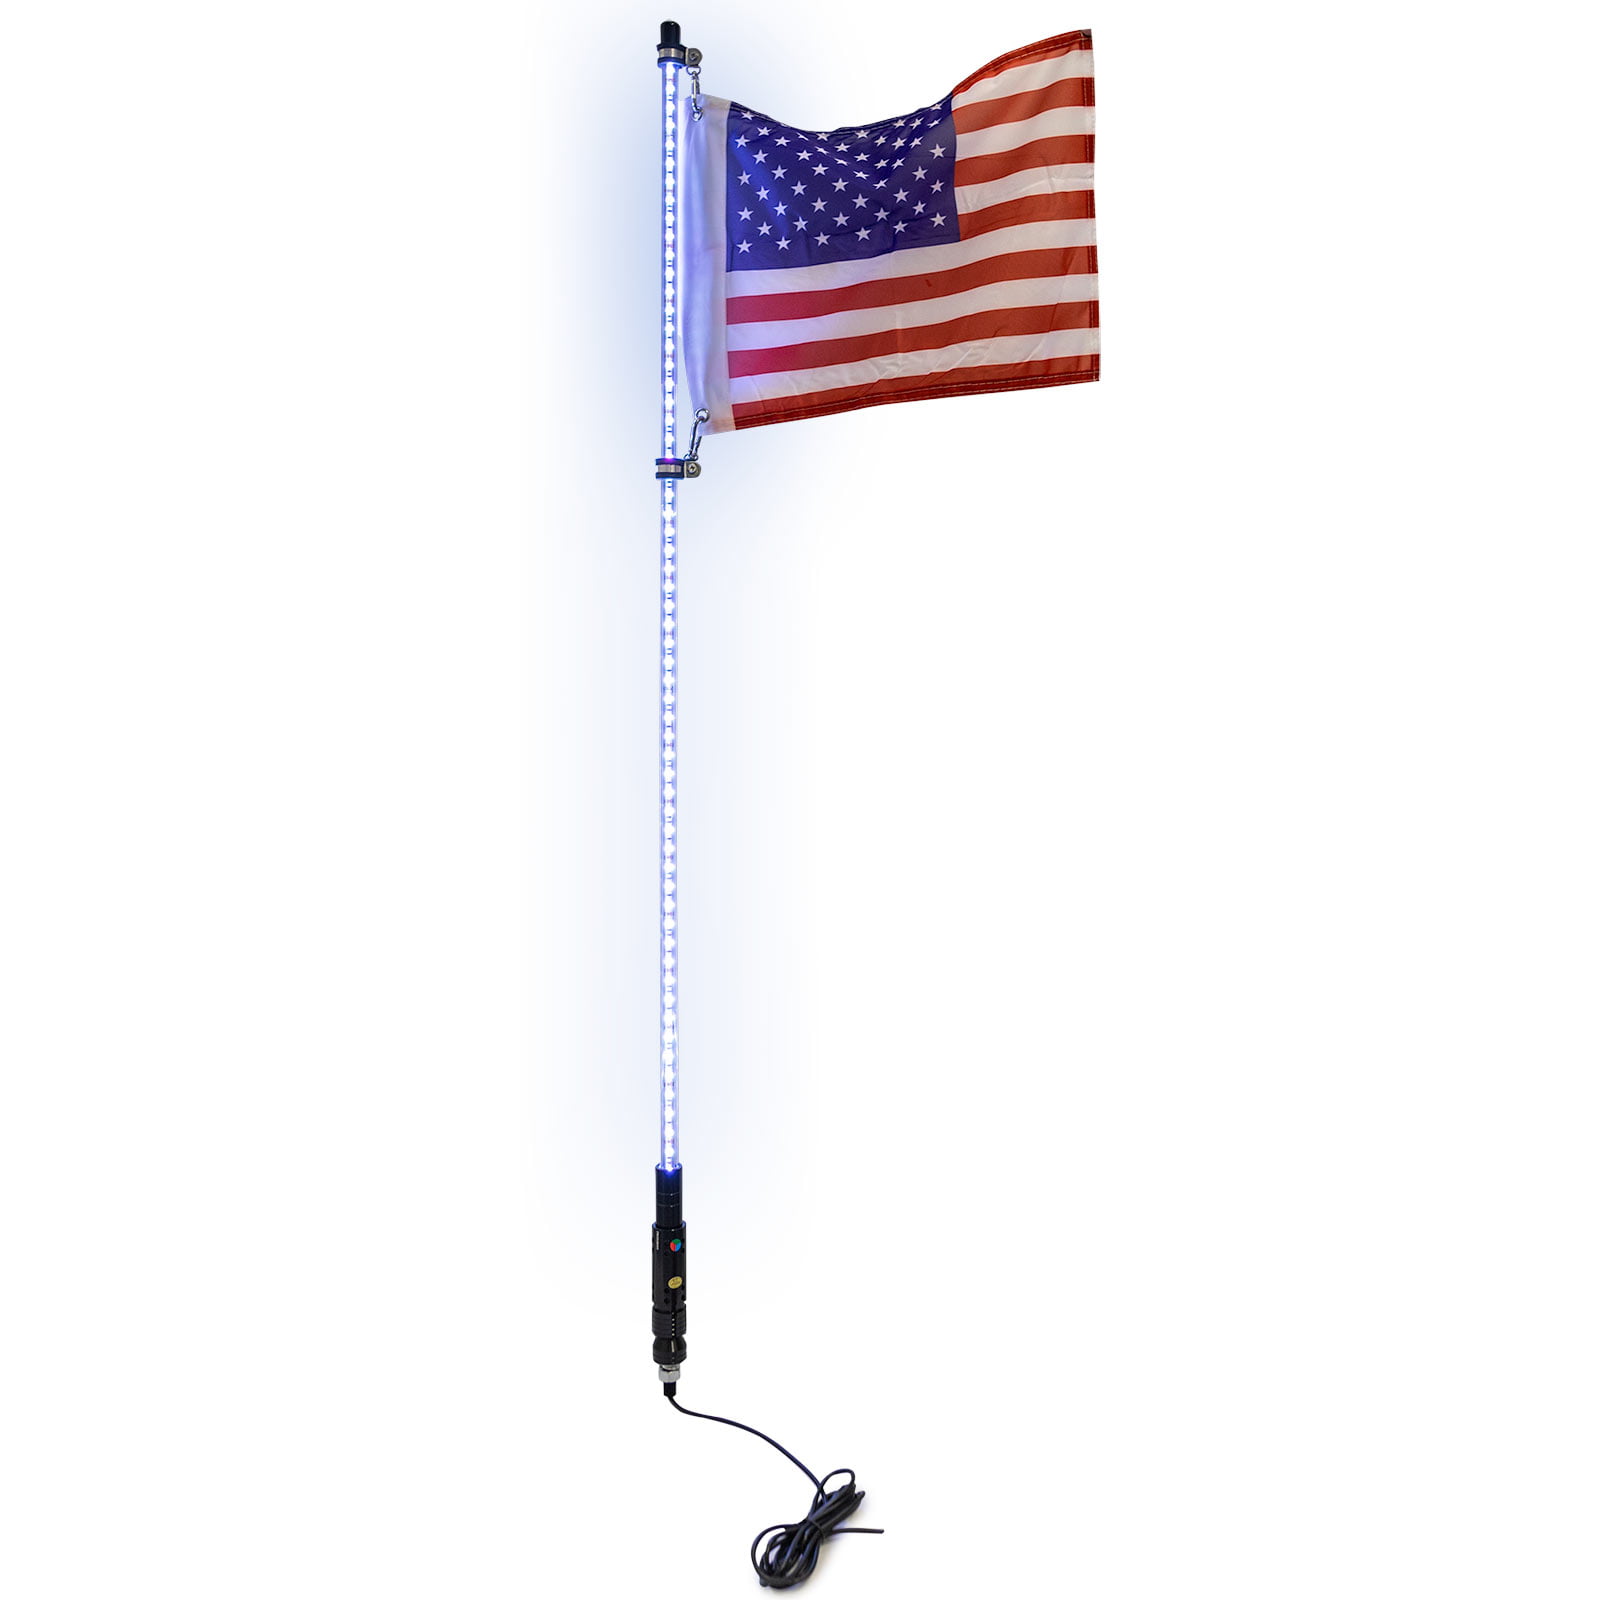 Trucks ATV 4ft Multi-Color LED Whip Light with Remote Control and American USA Flag UTV LED Antenna Whip Light for Sand Dune Buggy and Other Off-Road Vehicles Jeep RZR 